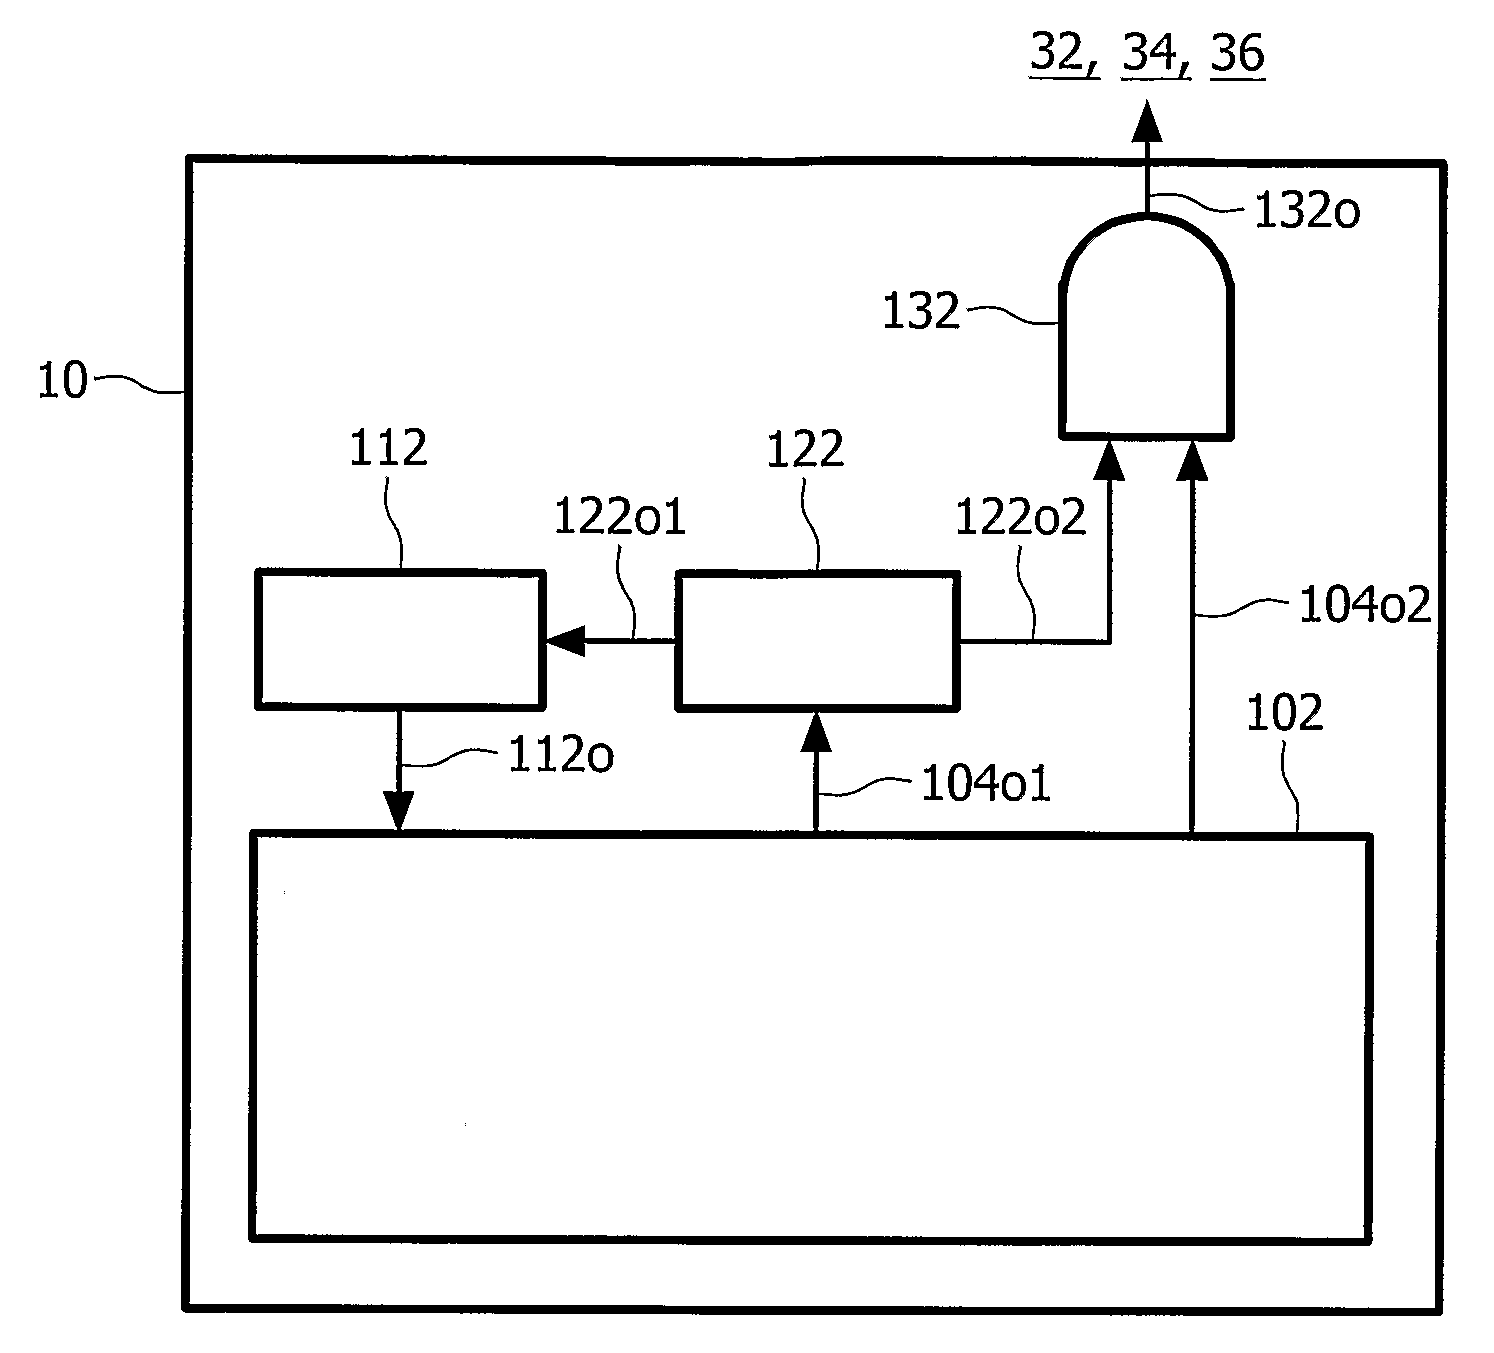 Circuit Arrangement and Method of Testing an Application Circuit Provided in Said Circuit Arrangement